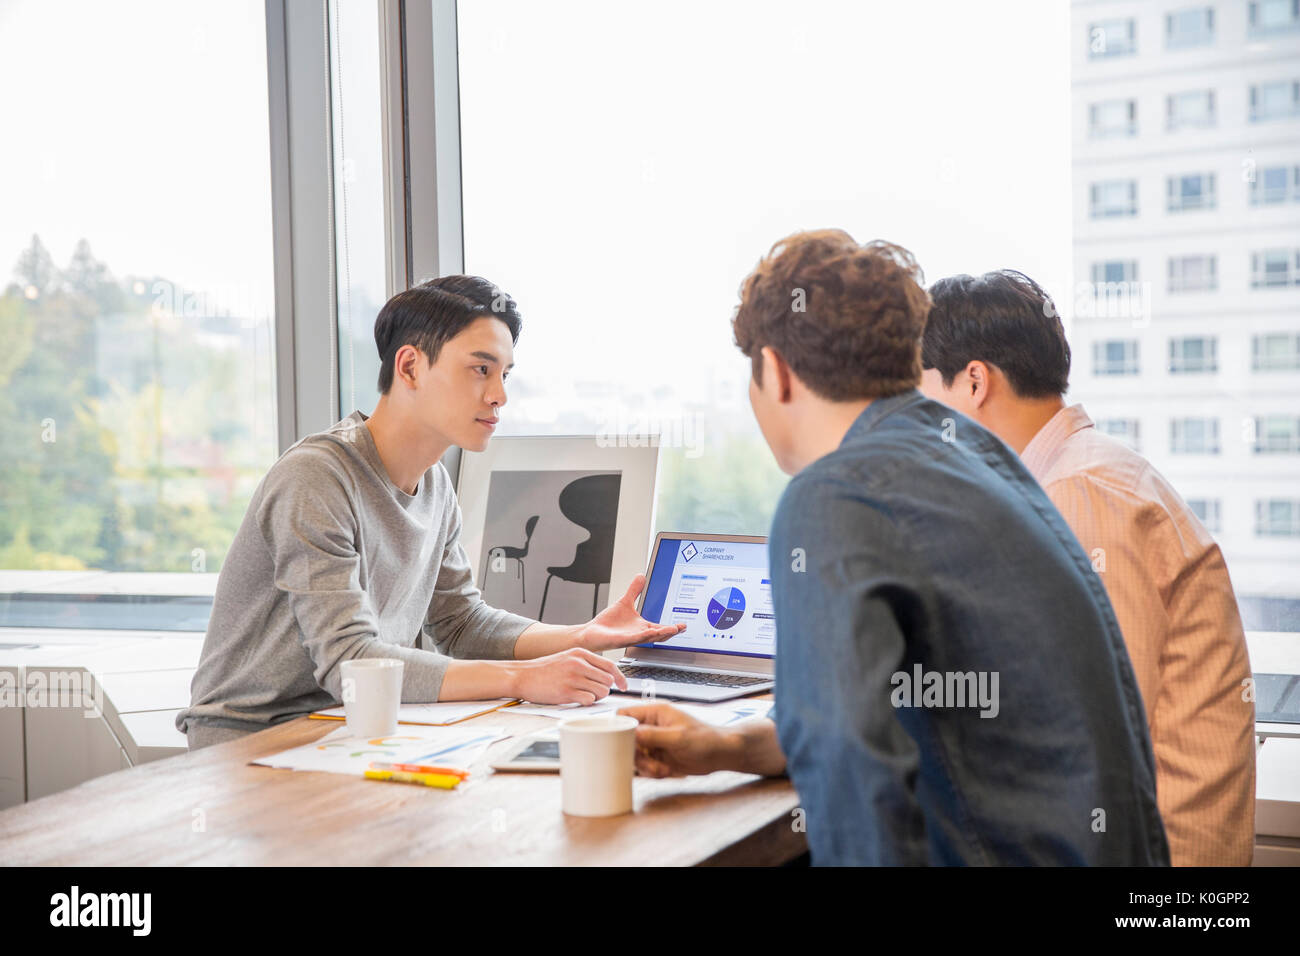 Portrait of three businessmen having a meeting at office Stock Photo